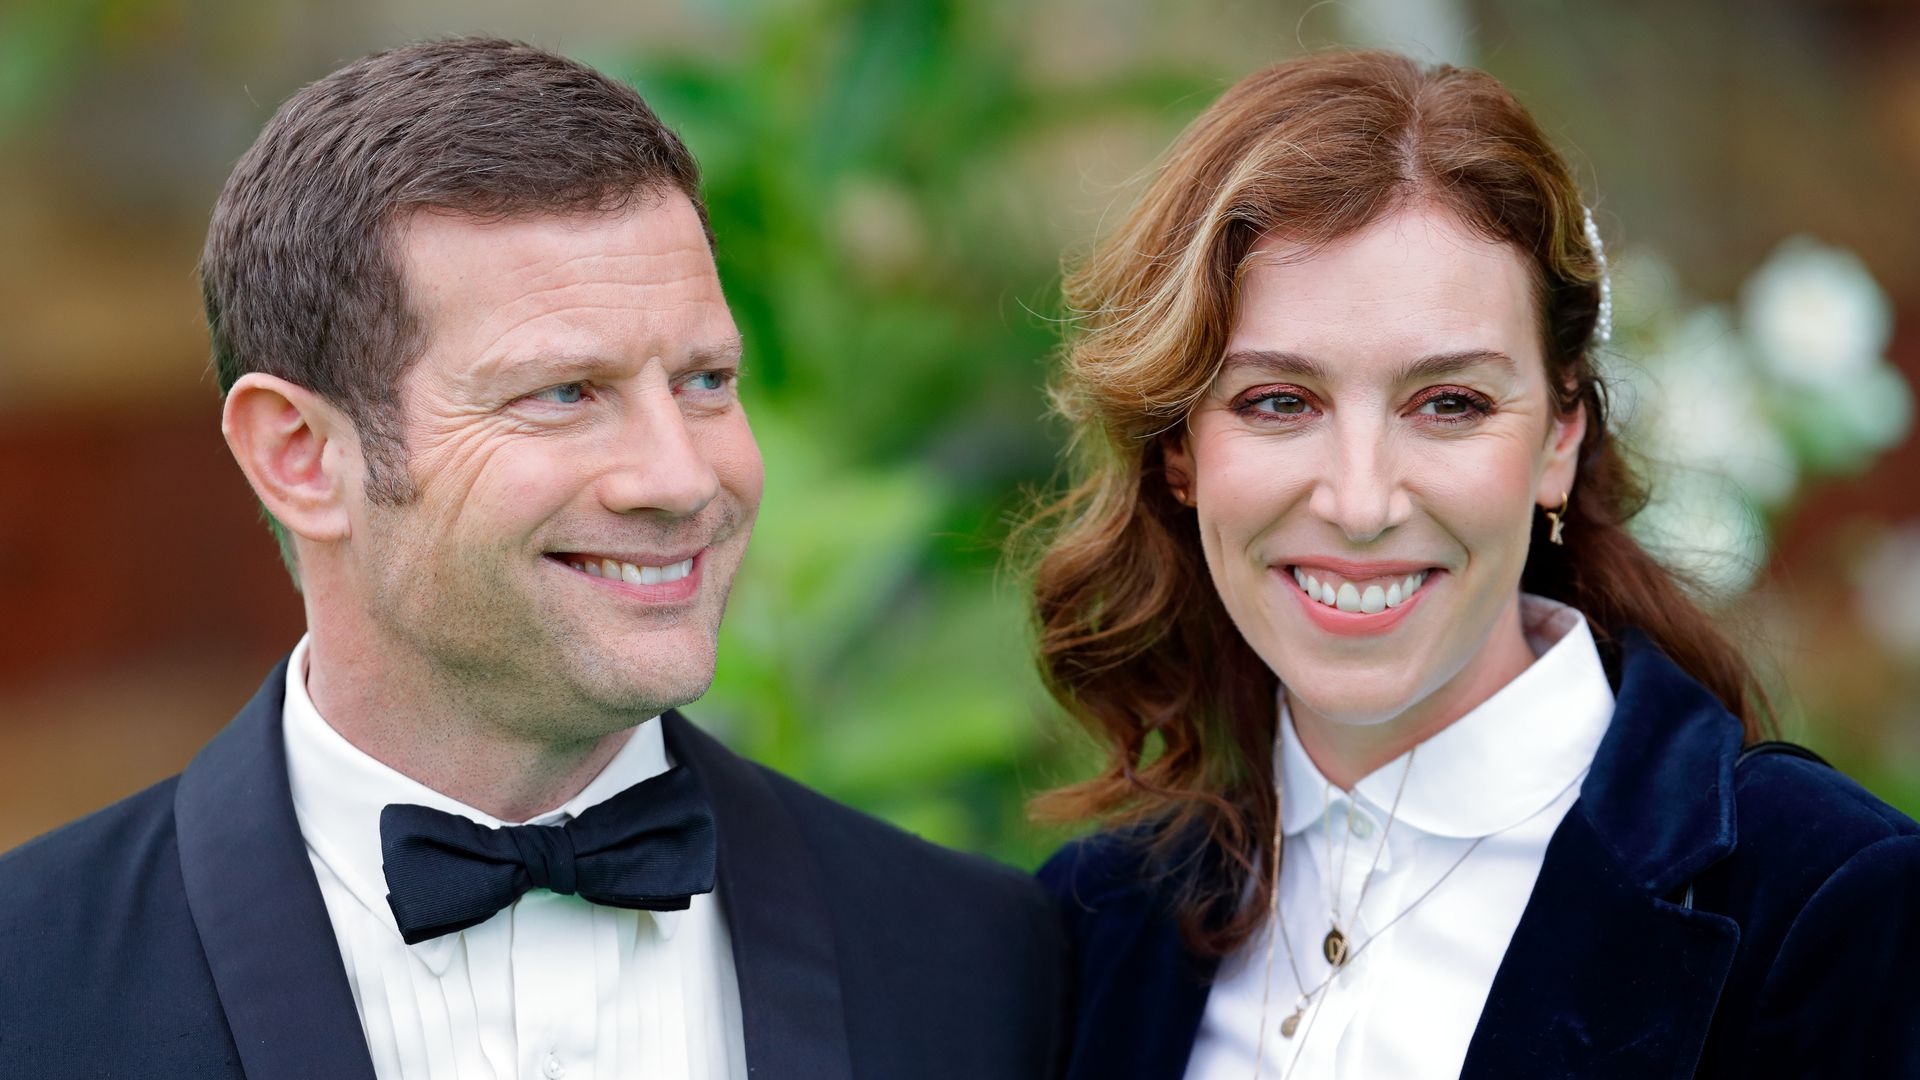 Dermot O'Leary and Dee Koppang attend the Earthshot Prize 2021 at Alexandra Palace on October 17, 2021 in London, England